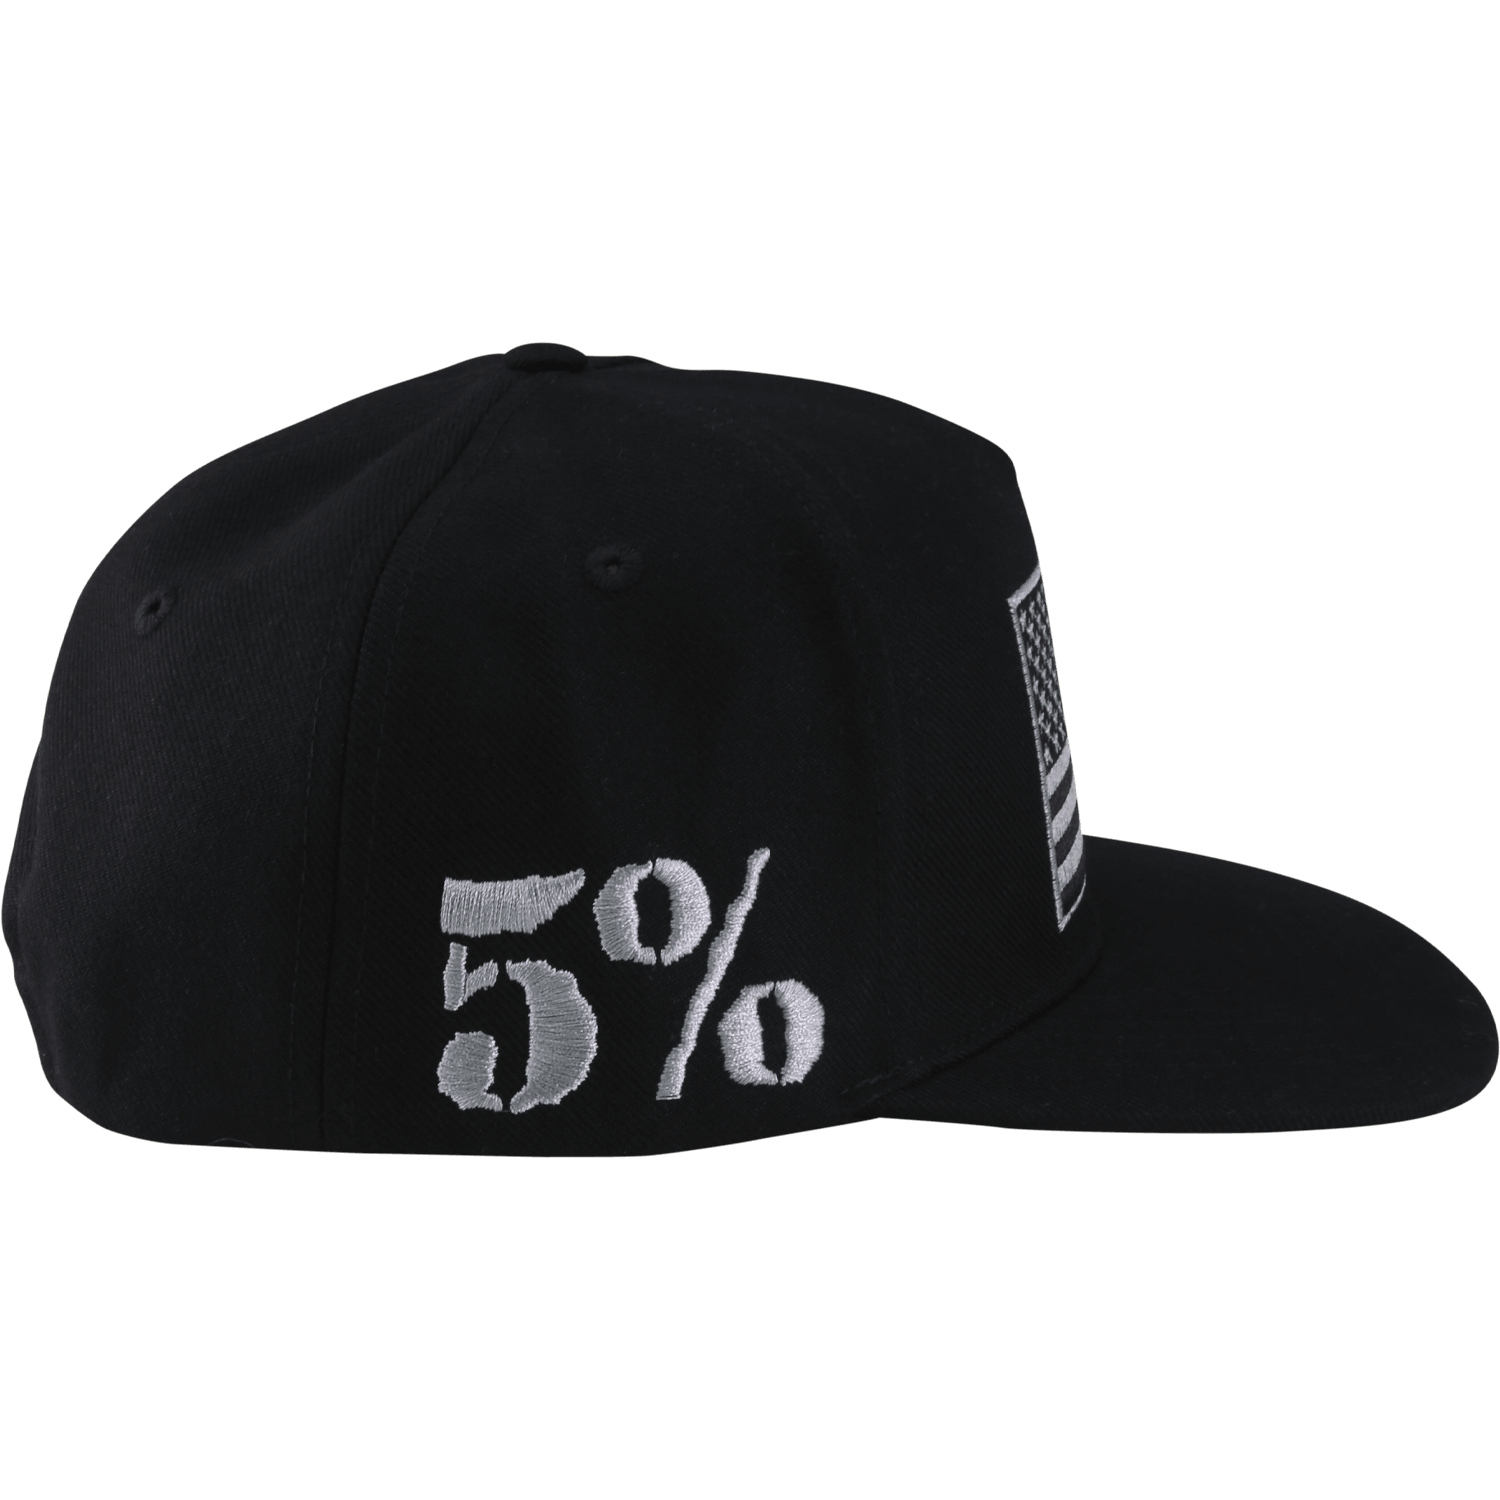 American Flag, Black Hat with Gray Graphic - 5% Nutrition